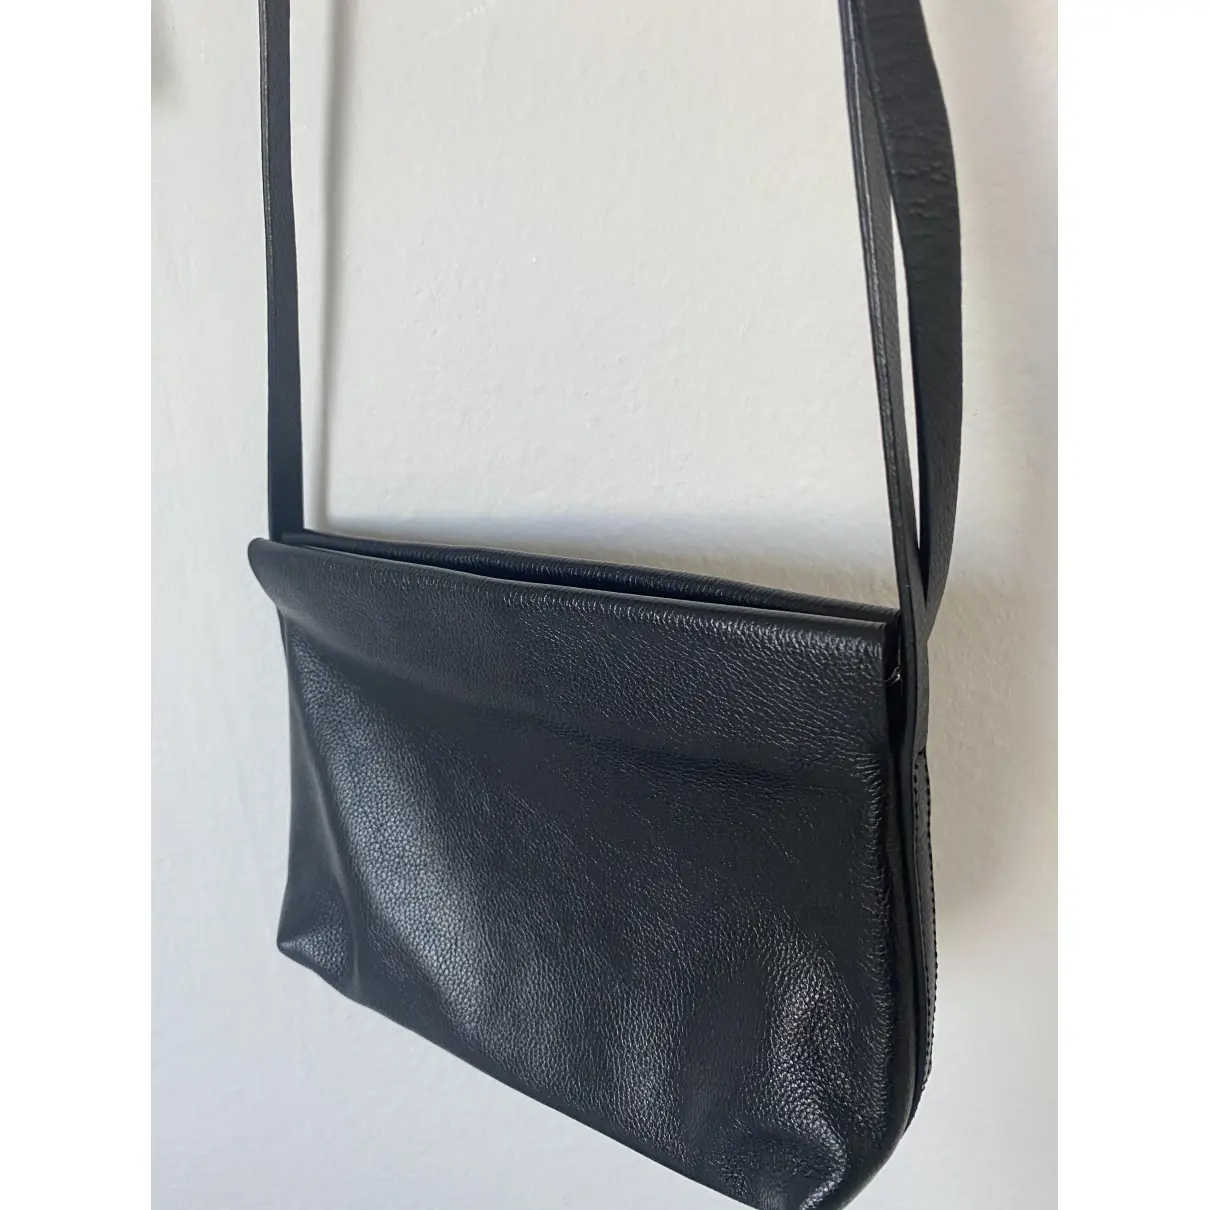 Buy Cos Leather bag online